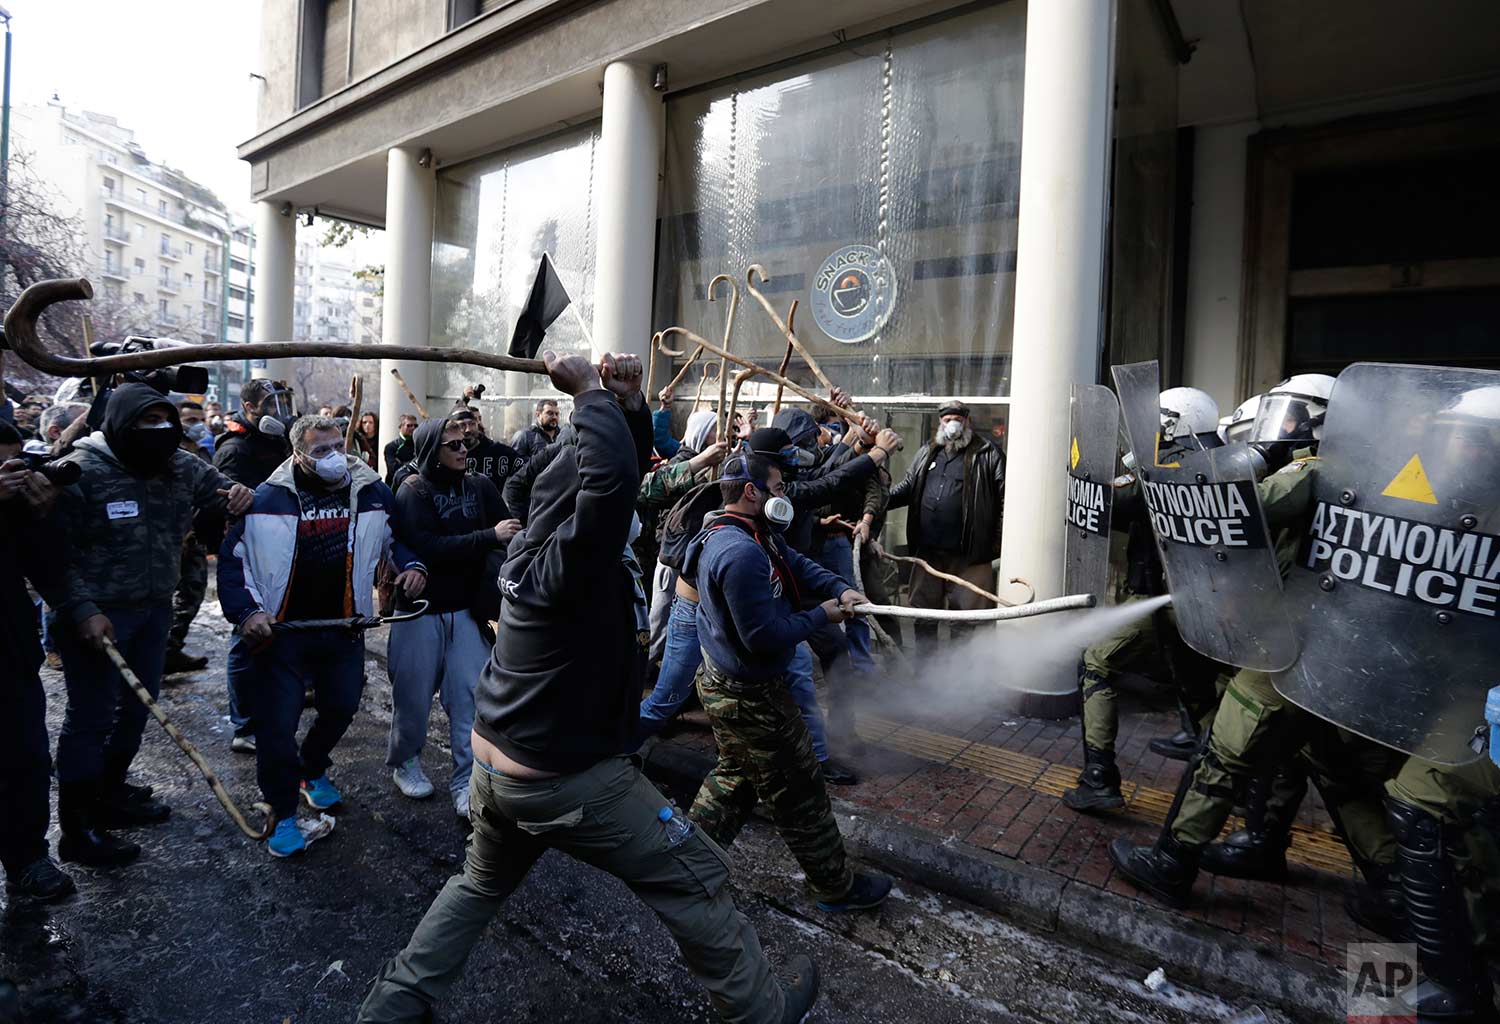  In this Wednesday, March 8, 2017 photo, riot police clash with protesting farmers outside the greek Agriculture Ministry, in Athens. Police fired tear gas to prevent farmers from forcing their way into the ministry building, while protesters respond